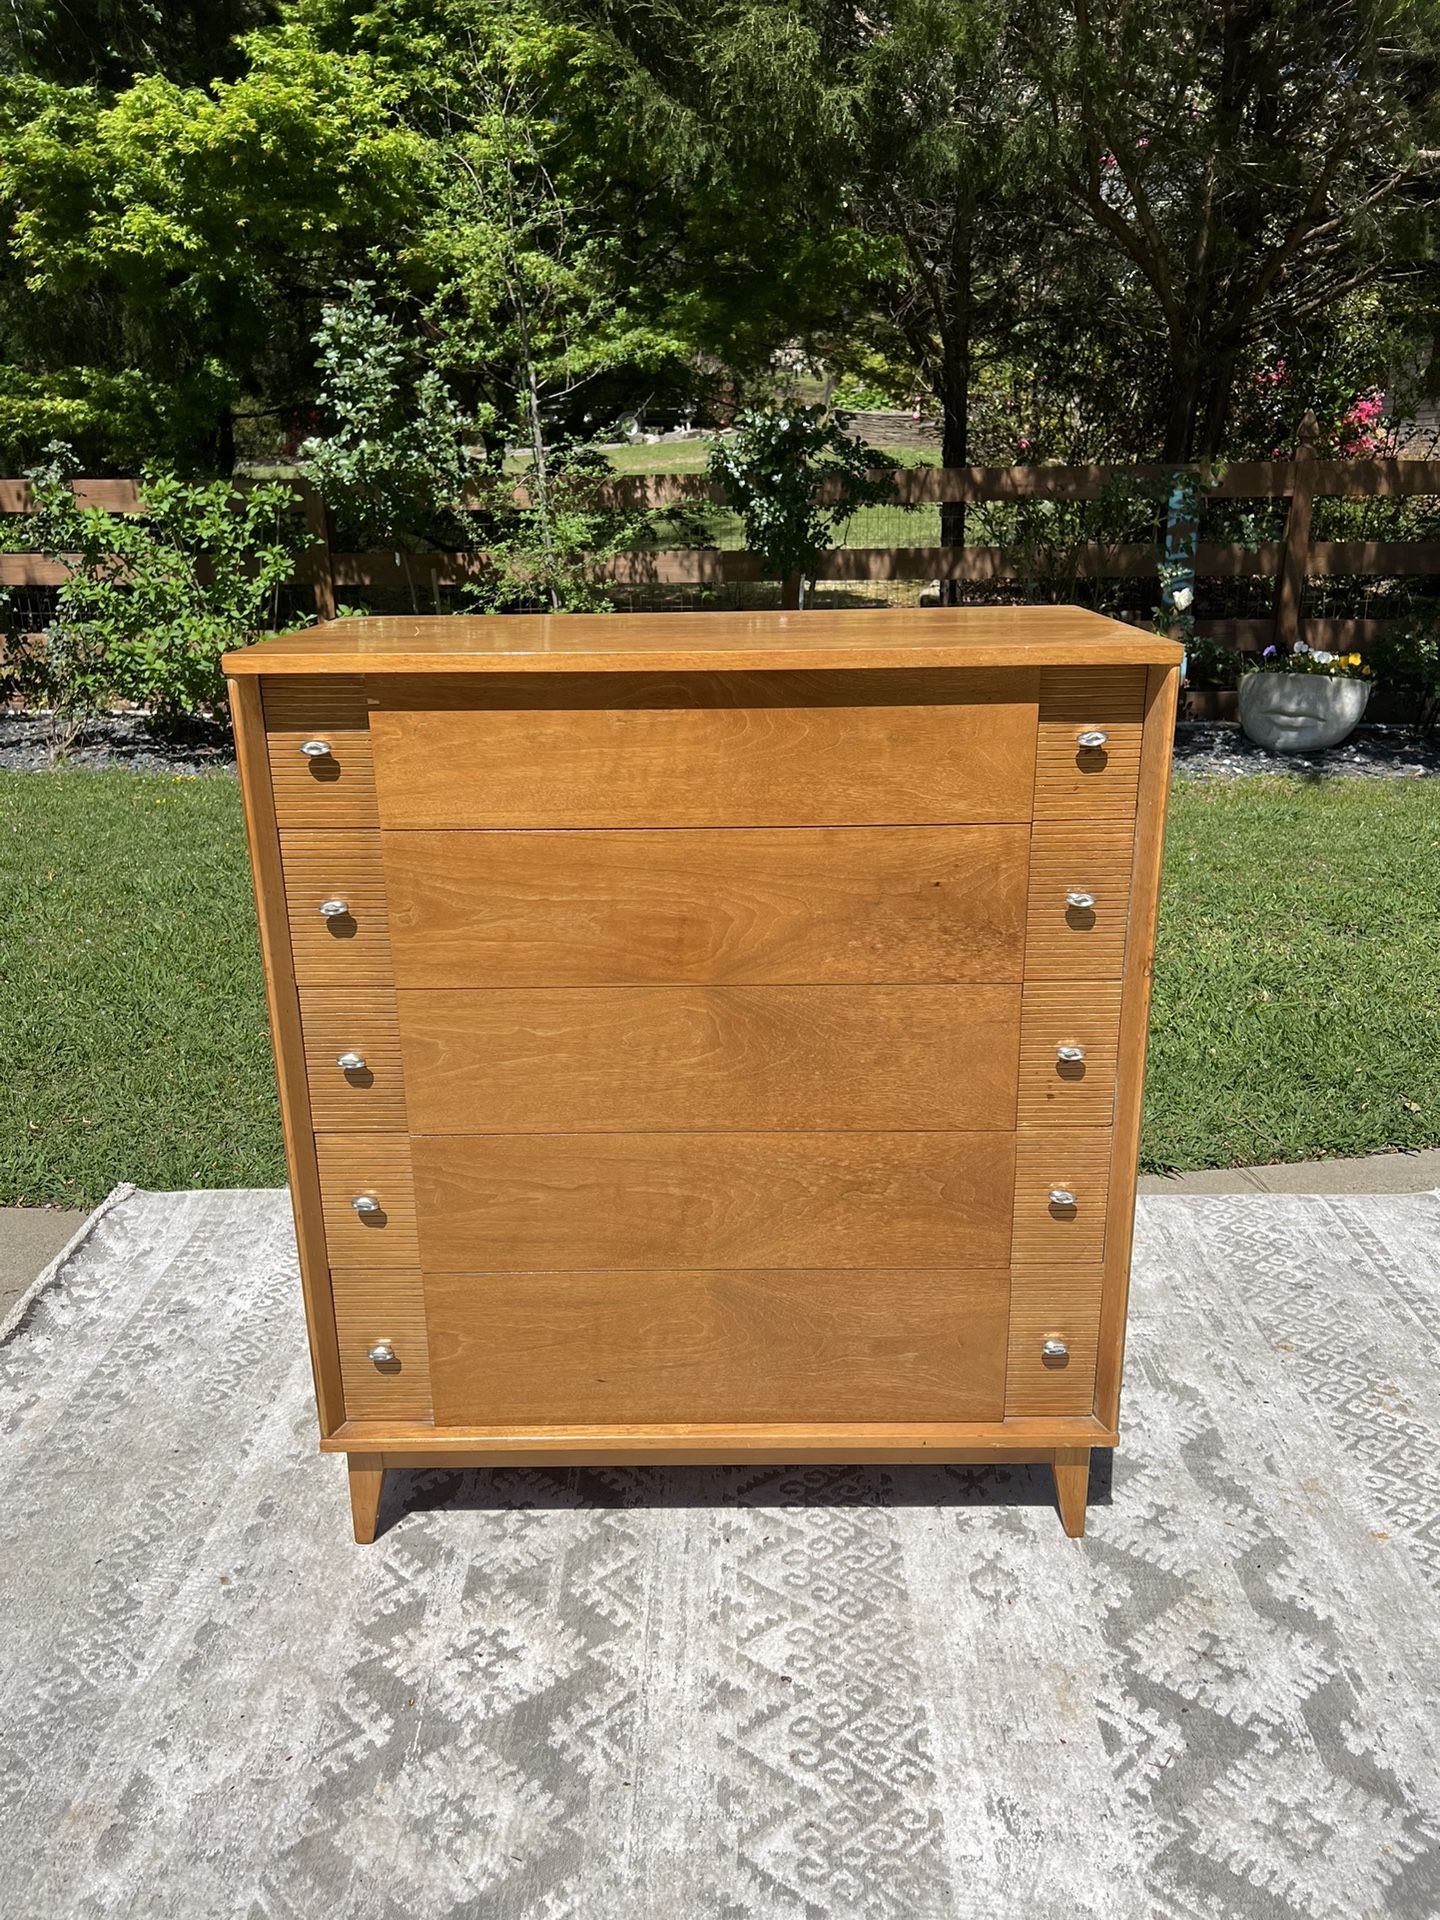 BEAUTIFUL MID CENTURY 5 Dovetail Drawers Dresser-Walnut $399 CAN DELIVER!